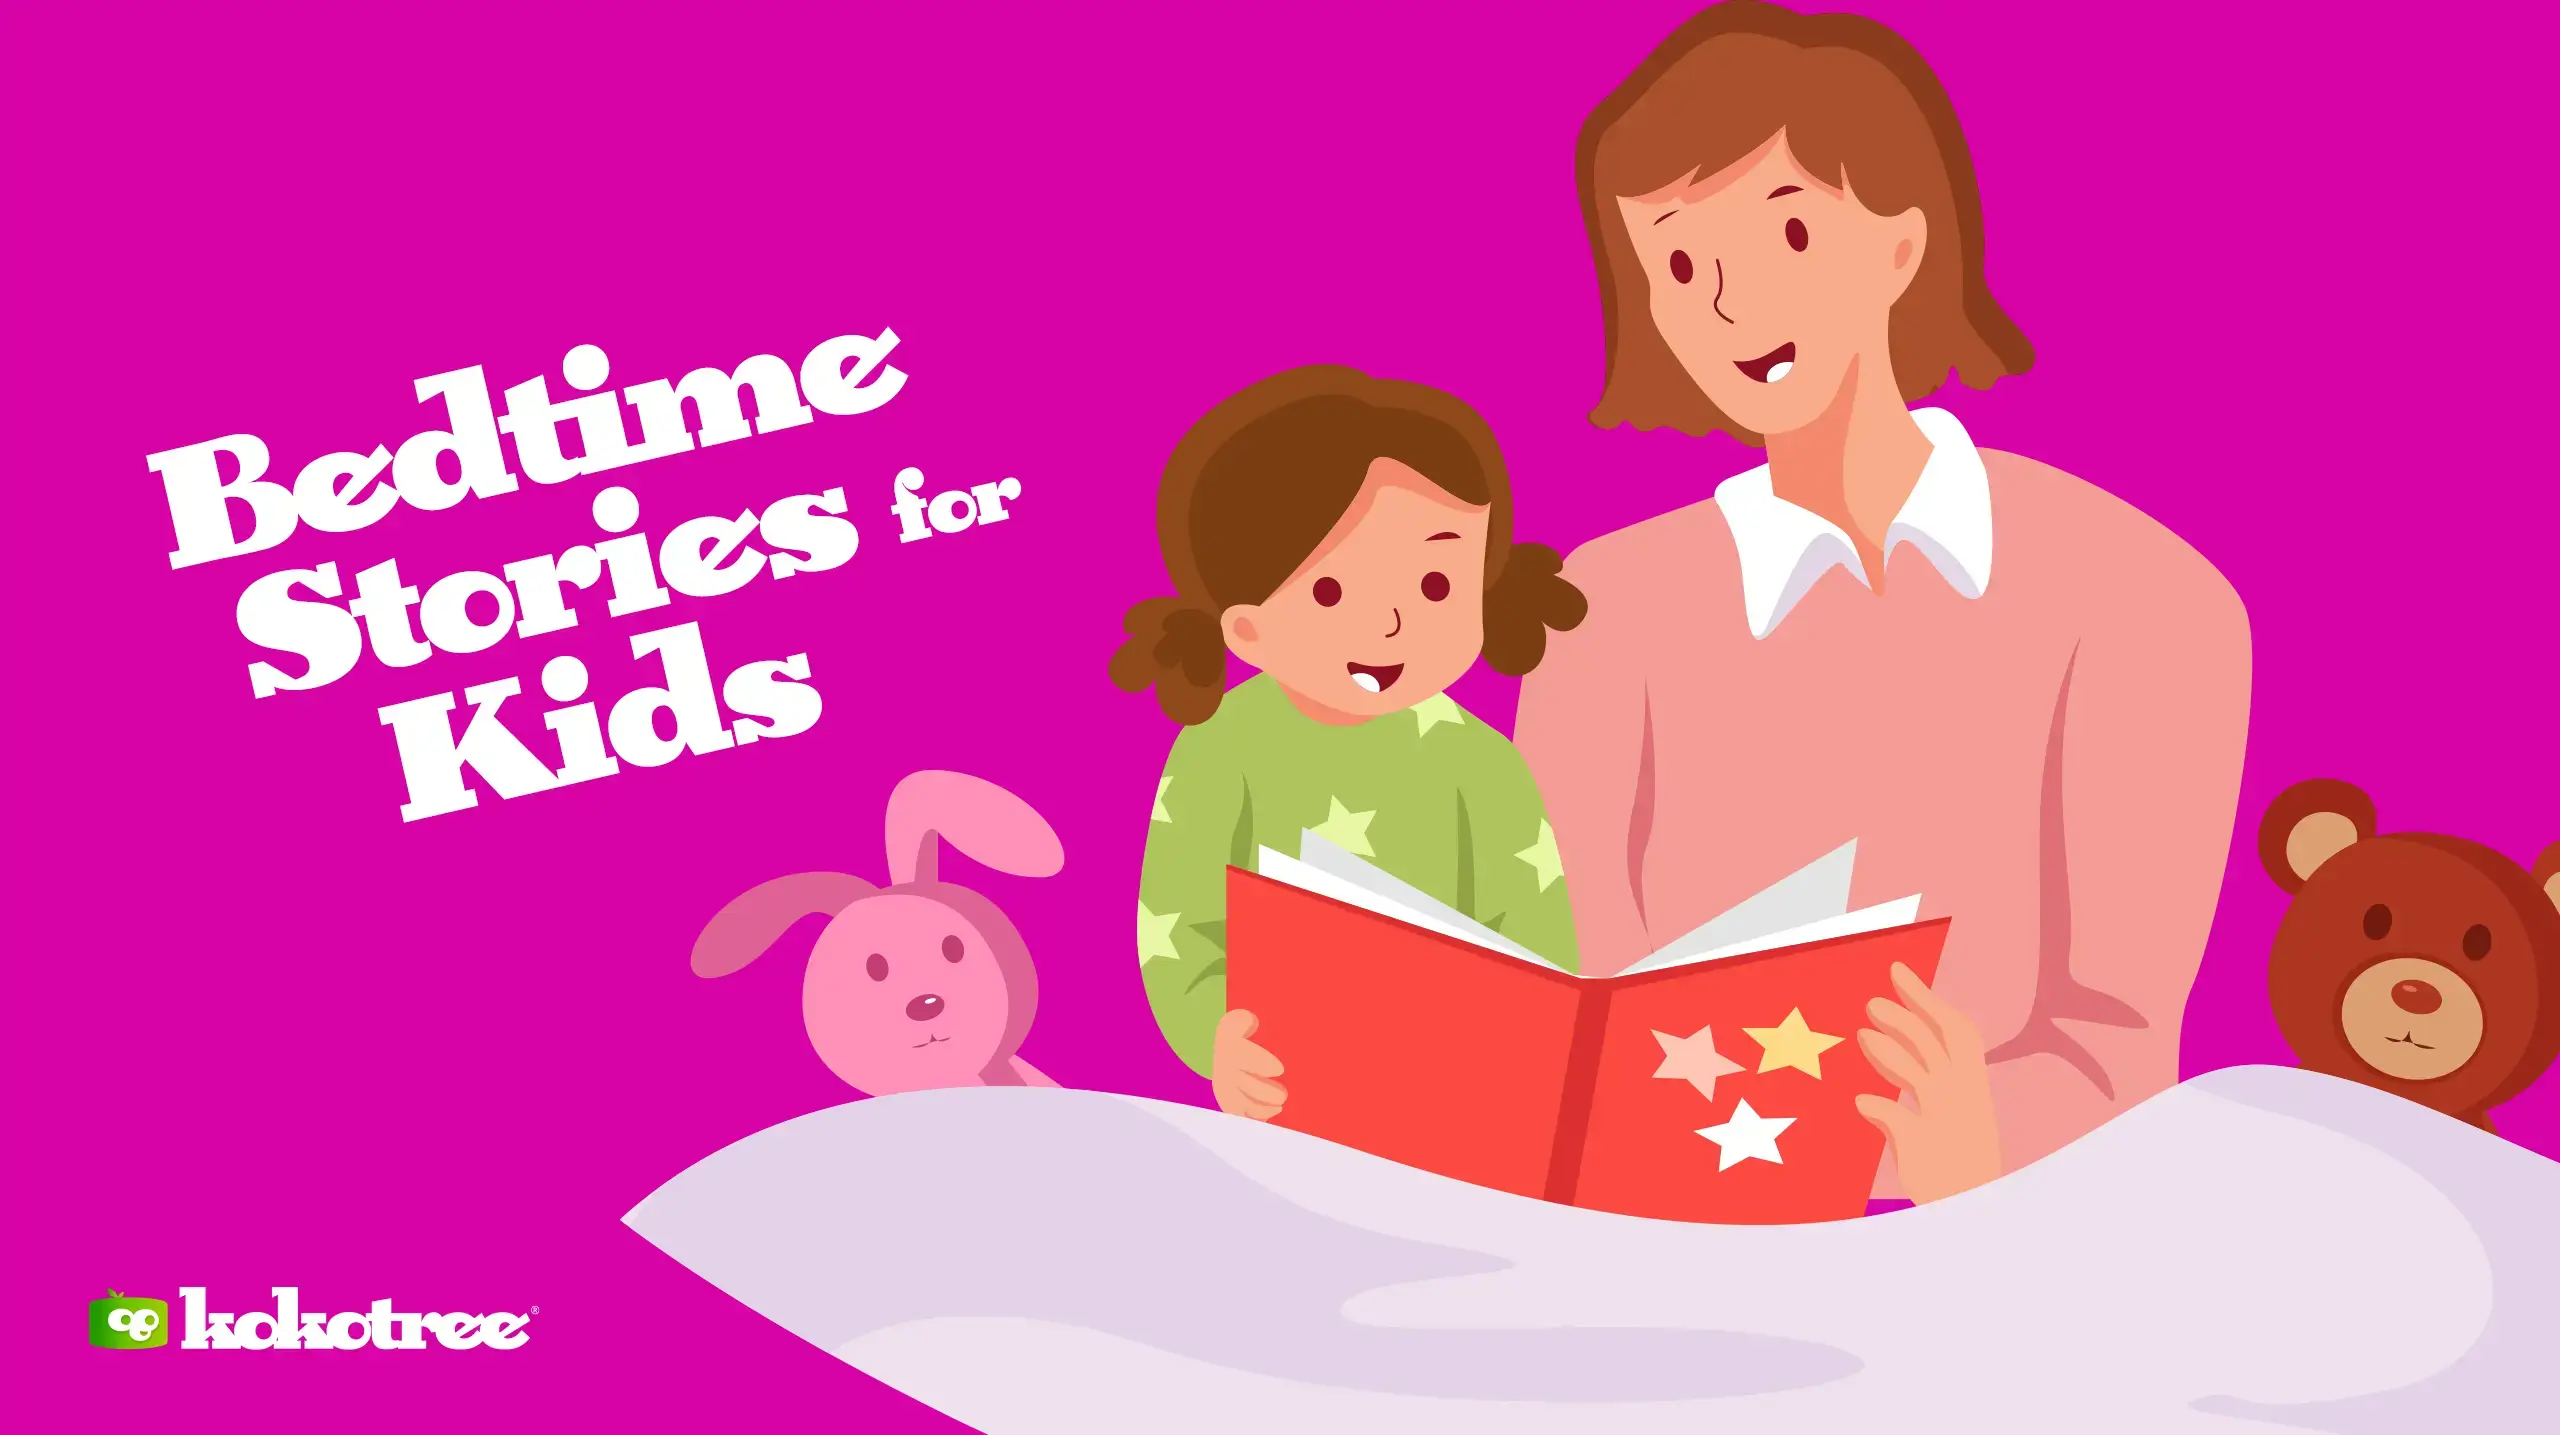 Bedtime Stories for Kids. (Free, English, Classic) - Kokotree